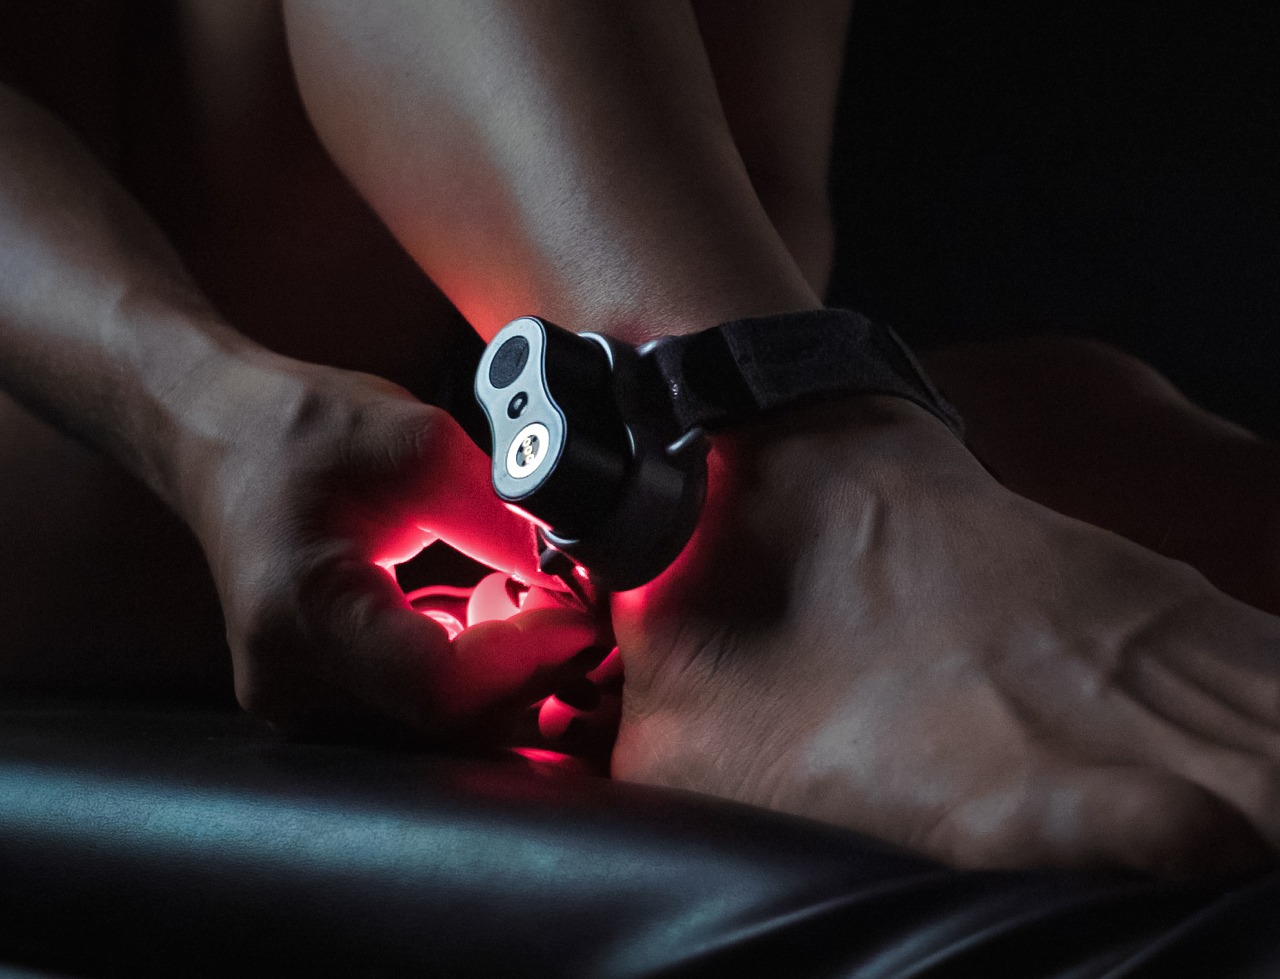 Reduce and heal chronic joint pain with the world’s first wearable ‘pain-killer’